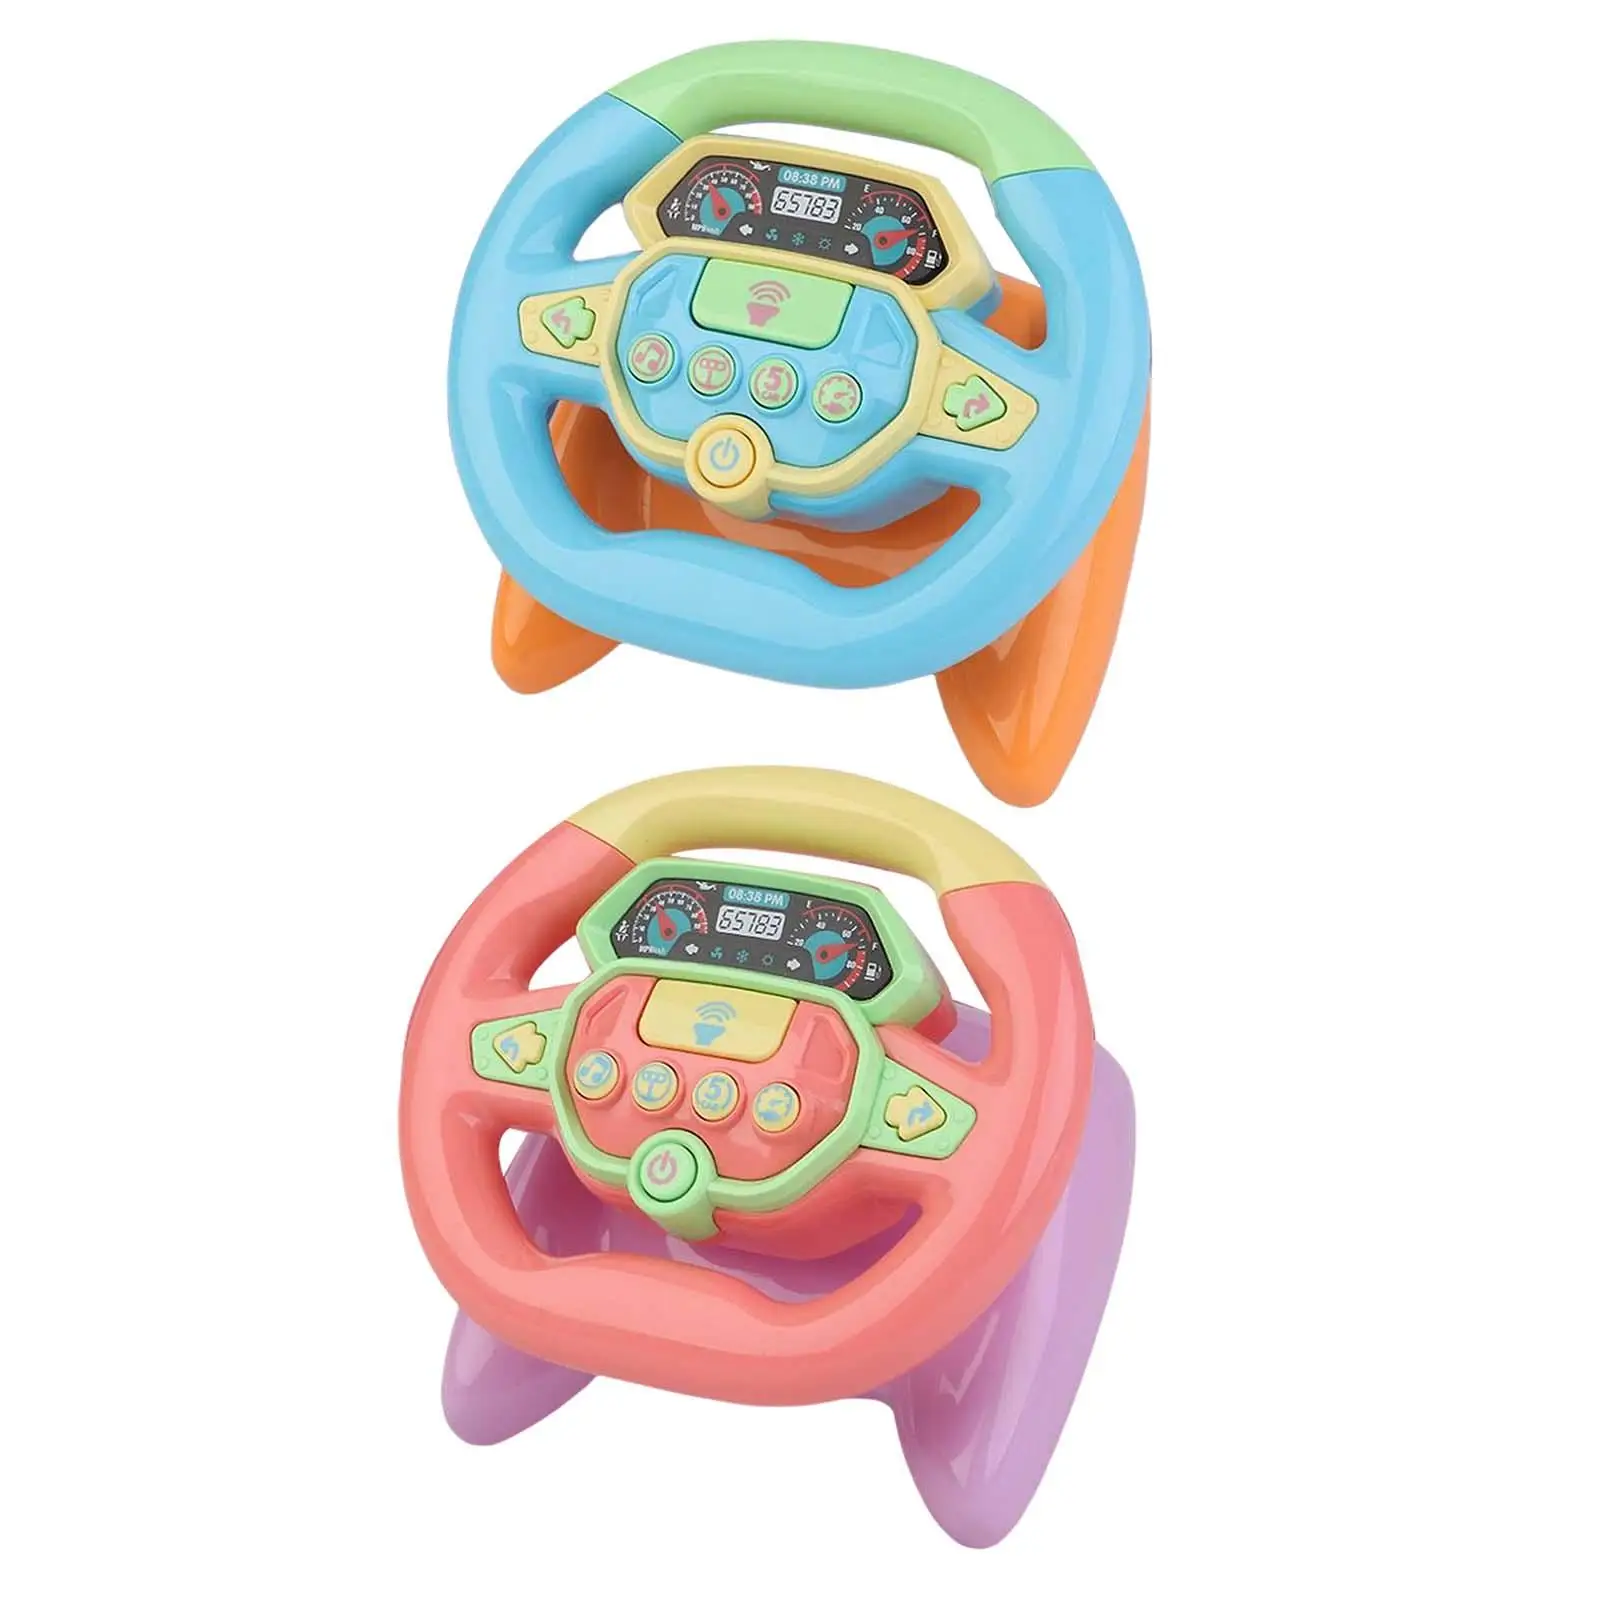 Rotating Driving Steering Wheel Toy Educational Learning Toy Pretend Play